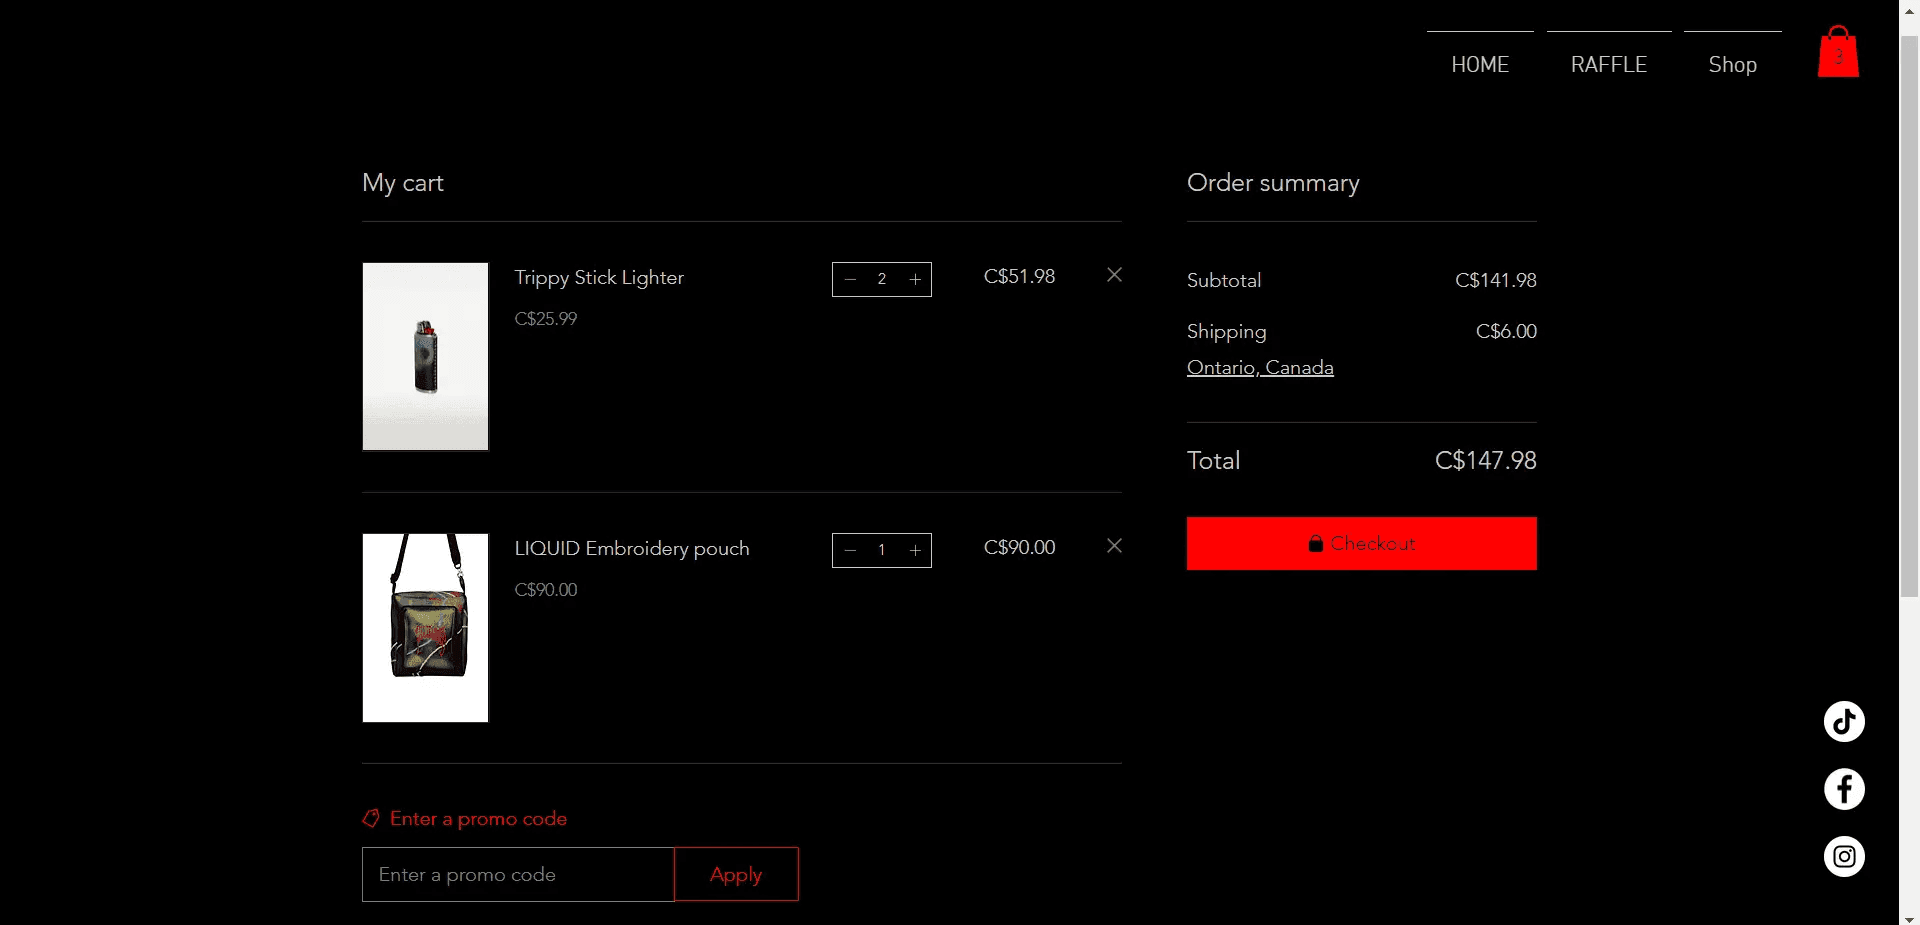 Two items are in the user's cart. The site is mostly black, with red and white accents